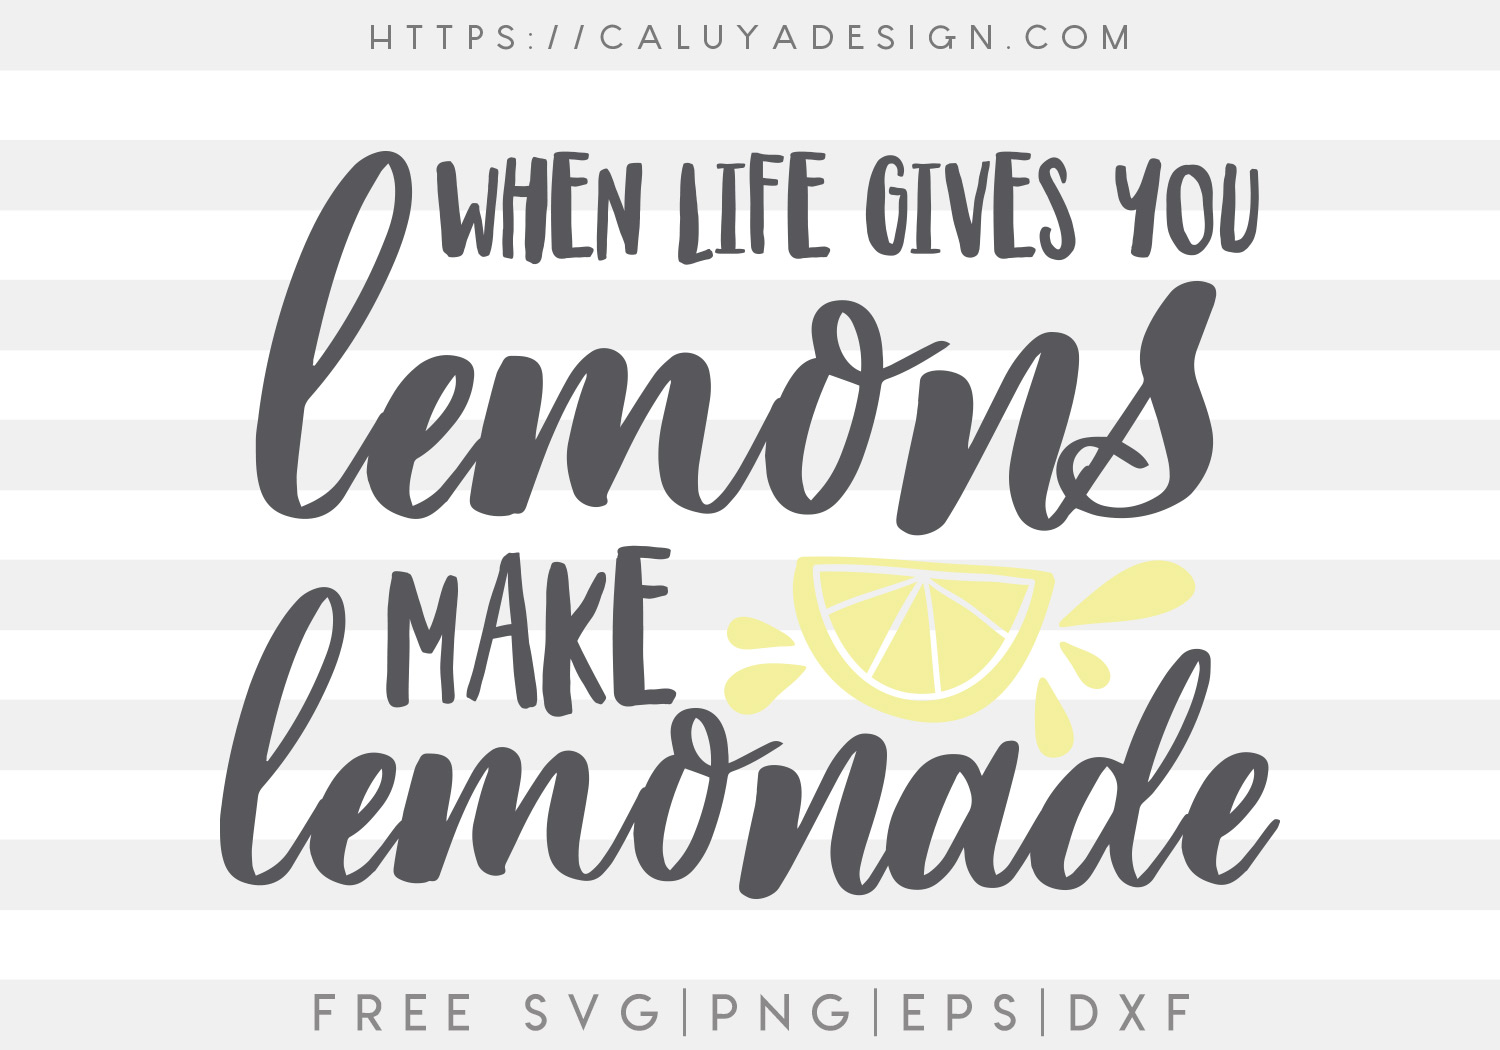 Lemonade Quote  SVG, PNG, EPS & DXF